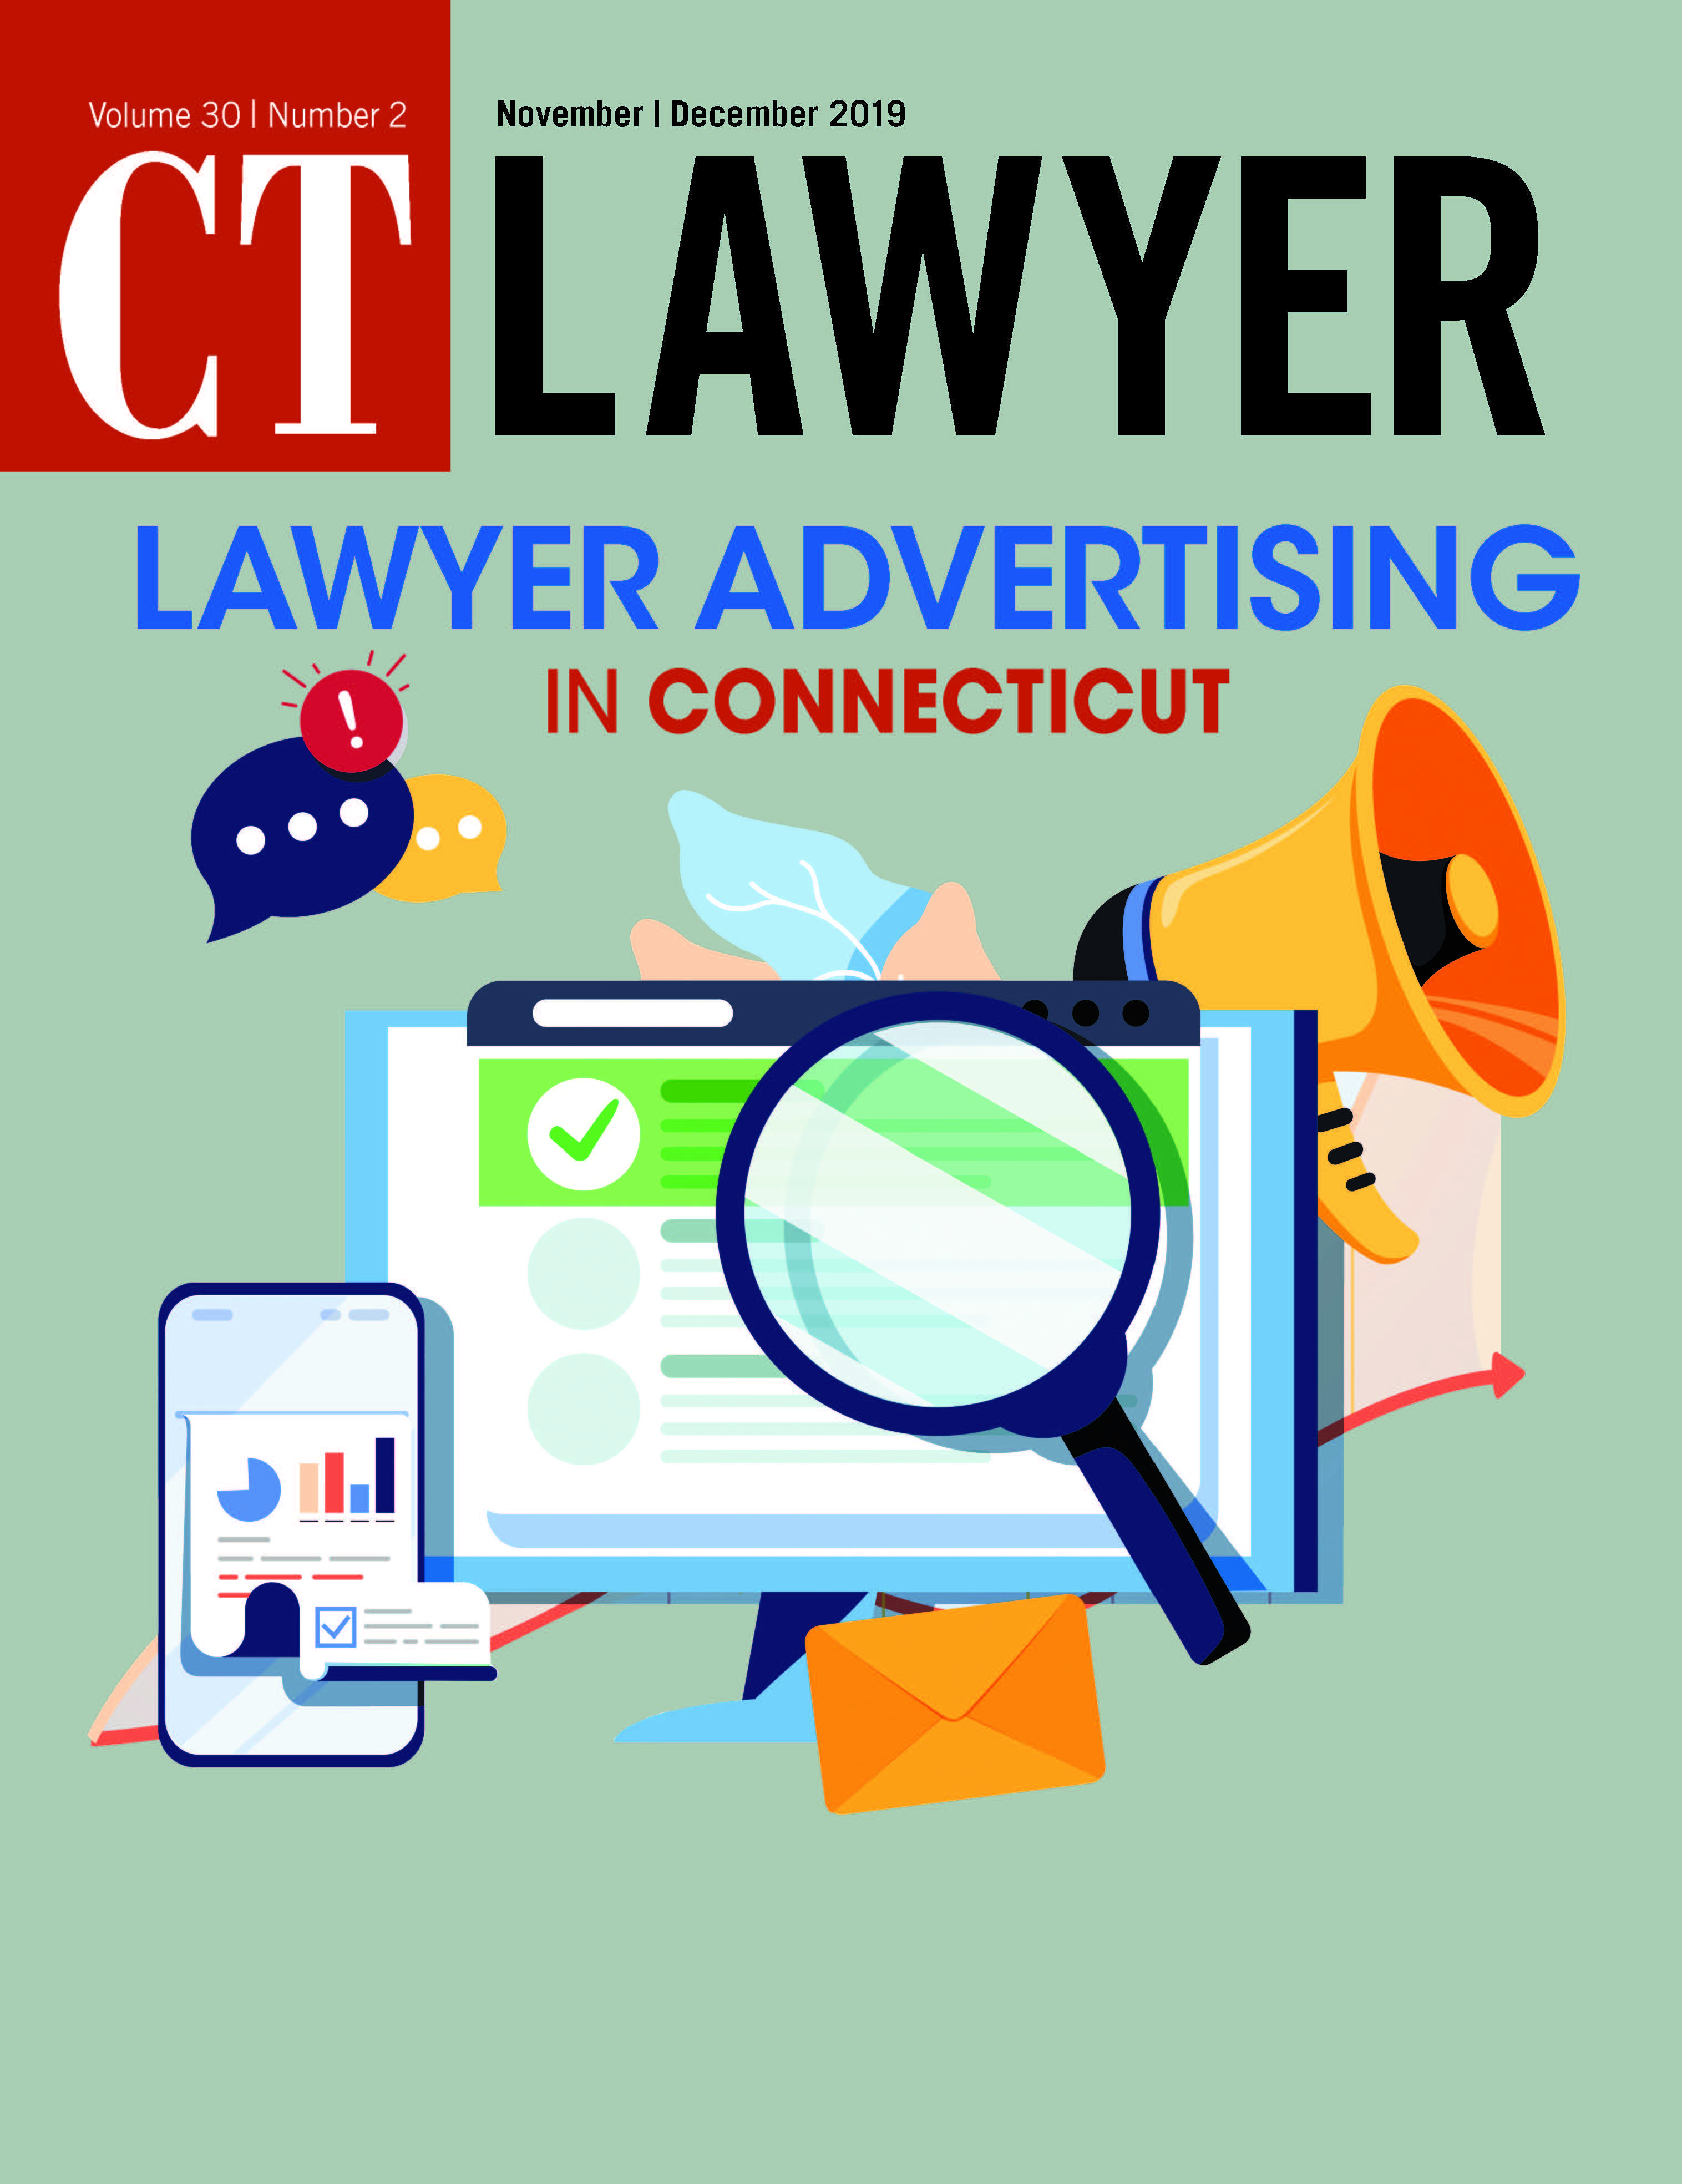 2 CT Lawyer NovDec 19 Cover